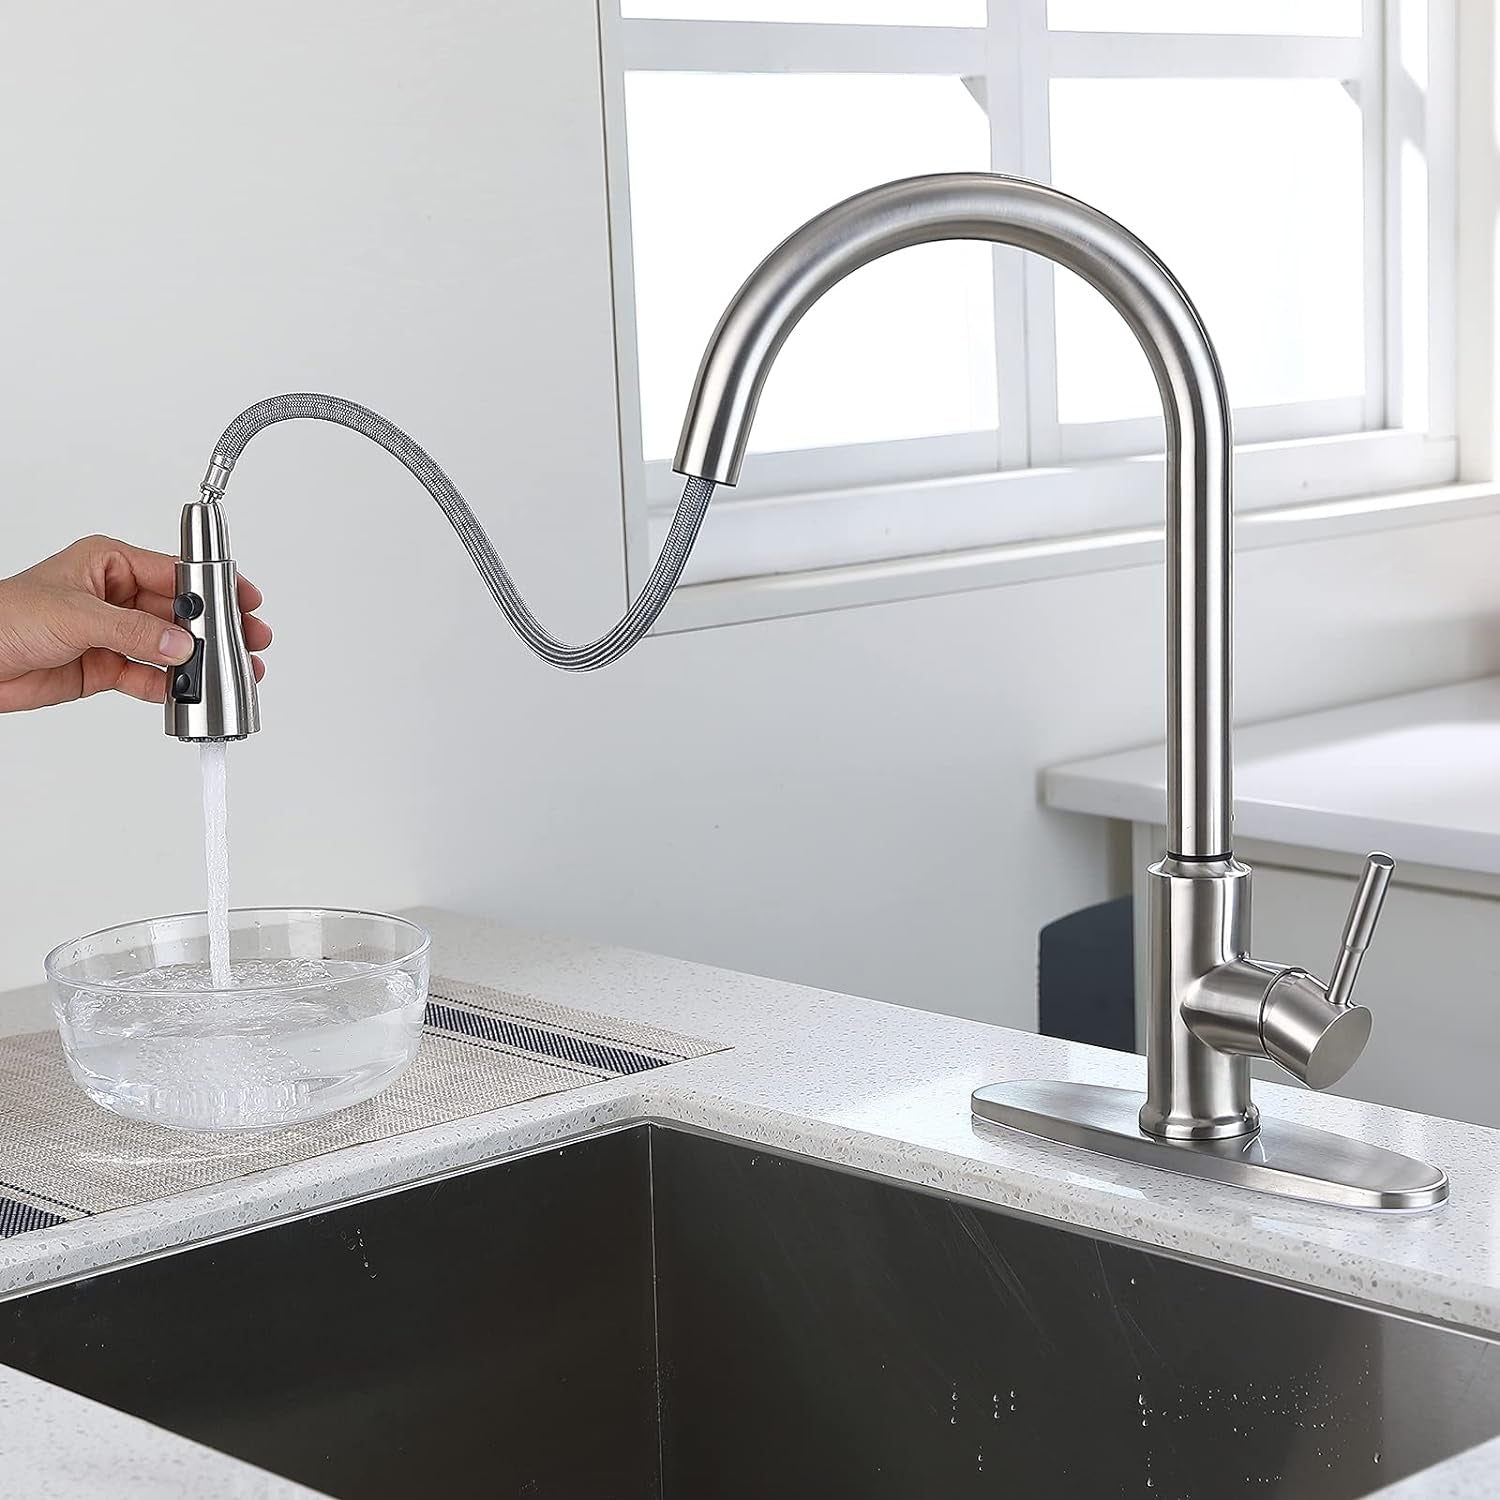 Kitchen Sink Faucet with Pull Out Sprayer, Fingerprint Resistant, Single Hole Deck Mount, Single Handle 304 Stainless Steel Kitchen Faucet, Brushed Nickel